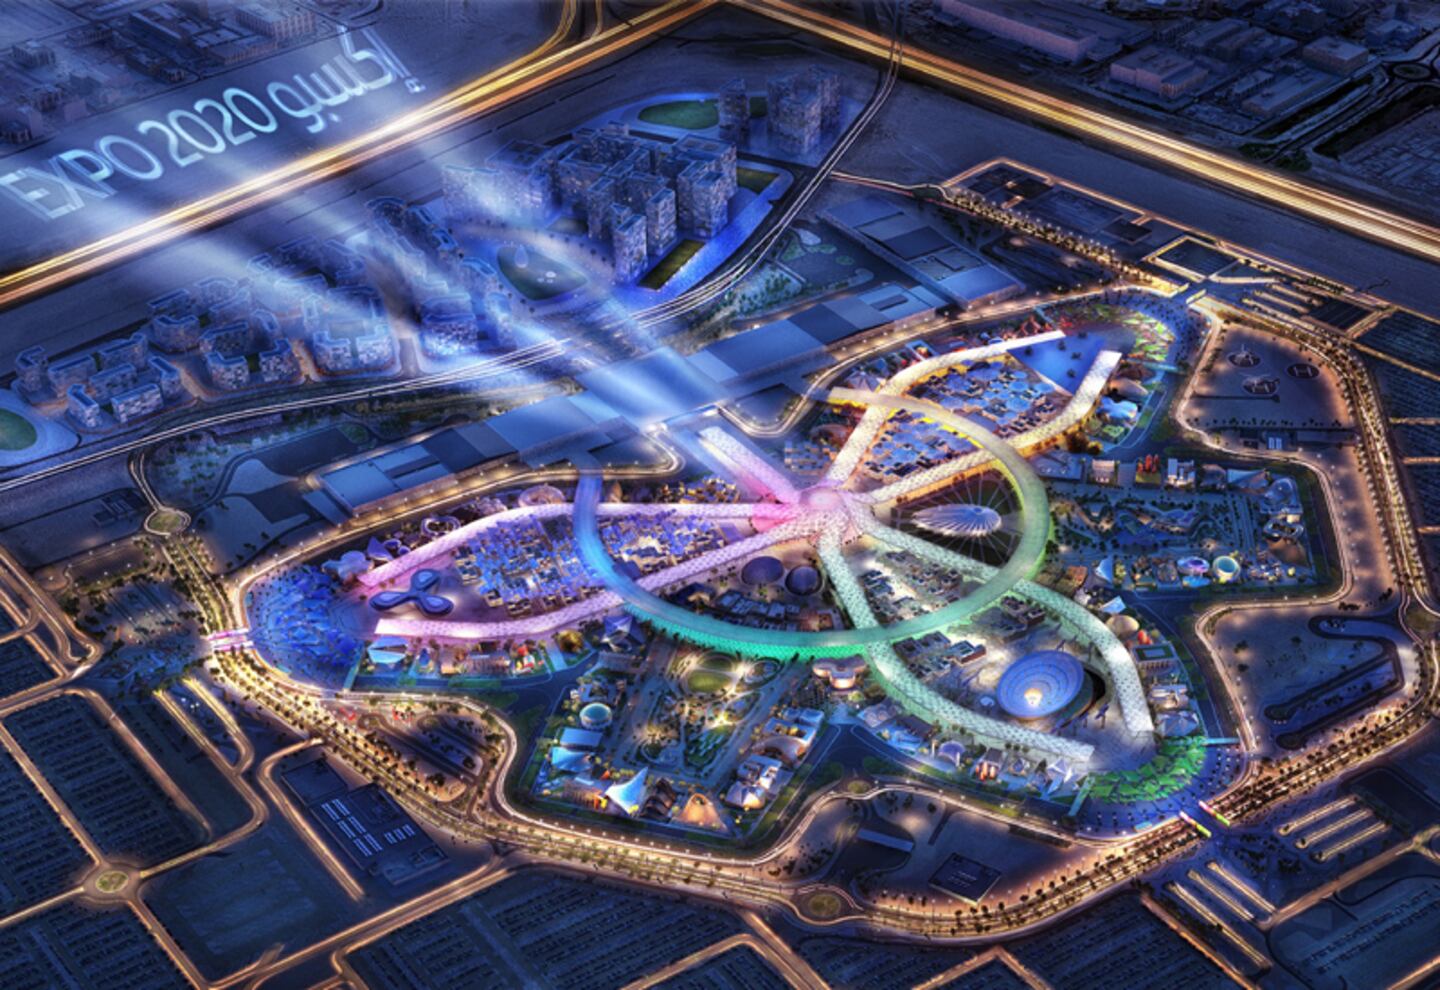 A rendering of the Dubai World Expo 2020 site. World Expo 2020